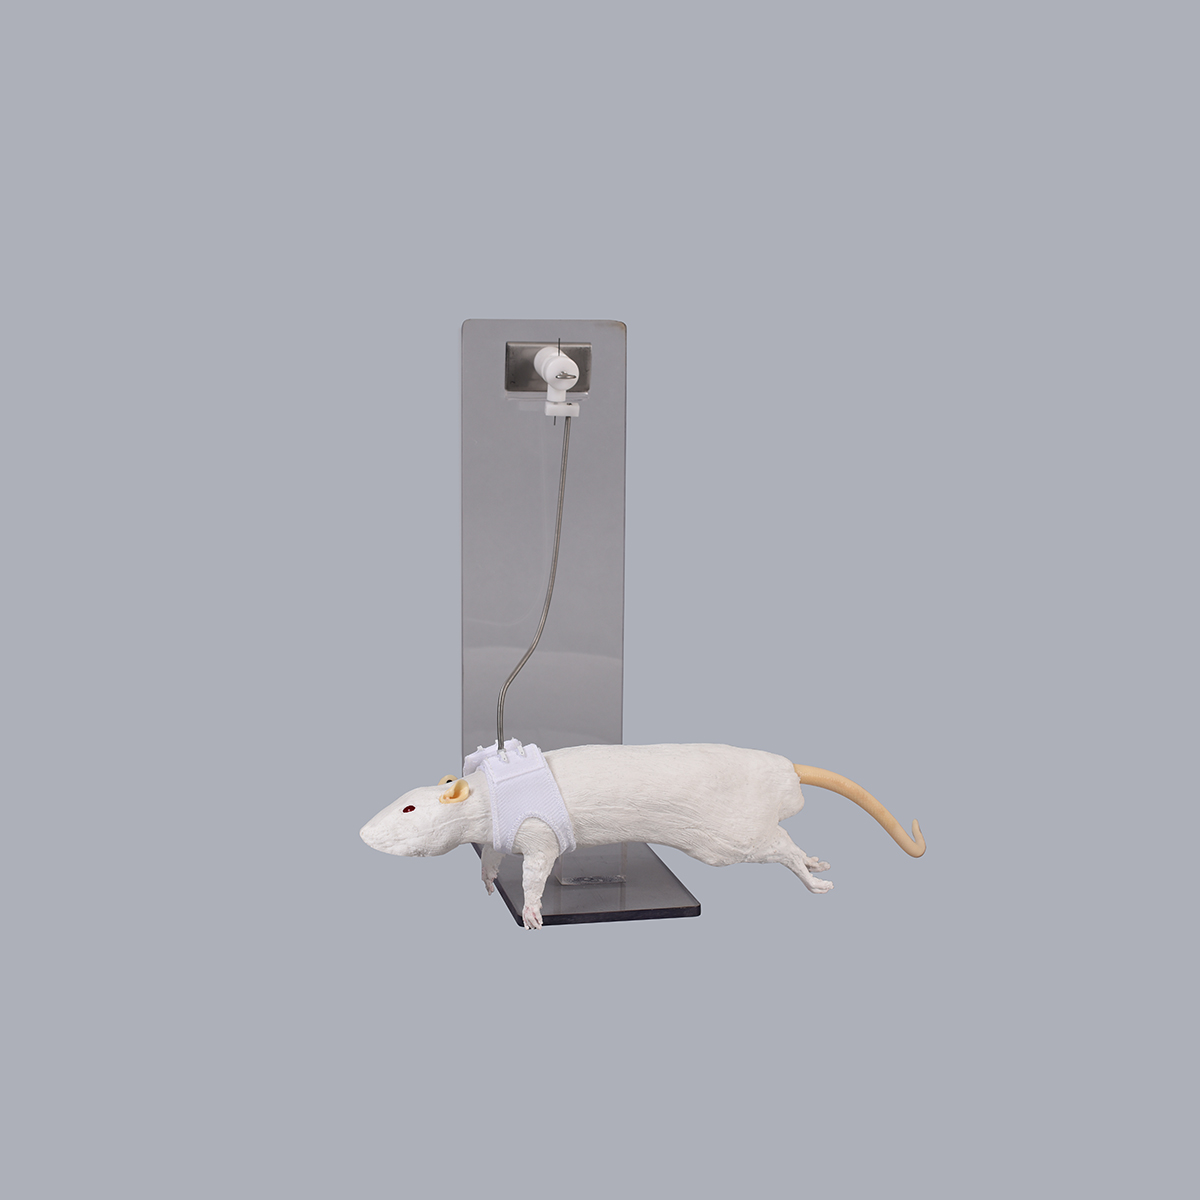 Rat in Tether System